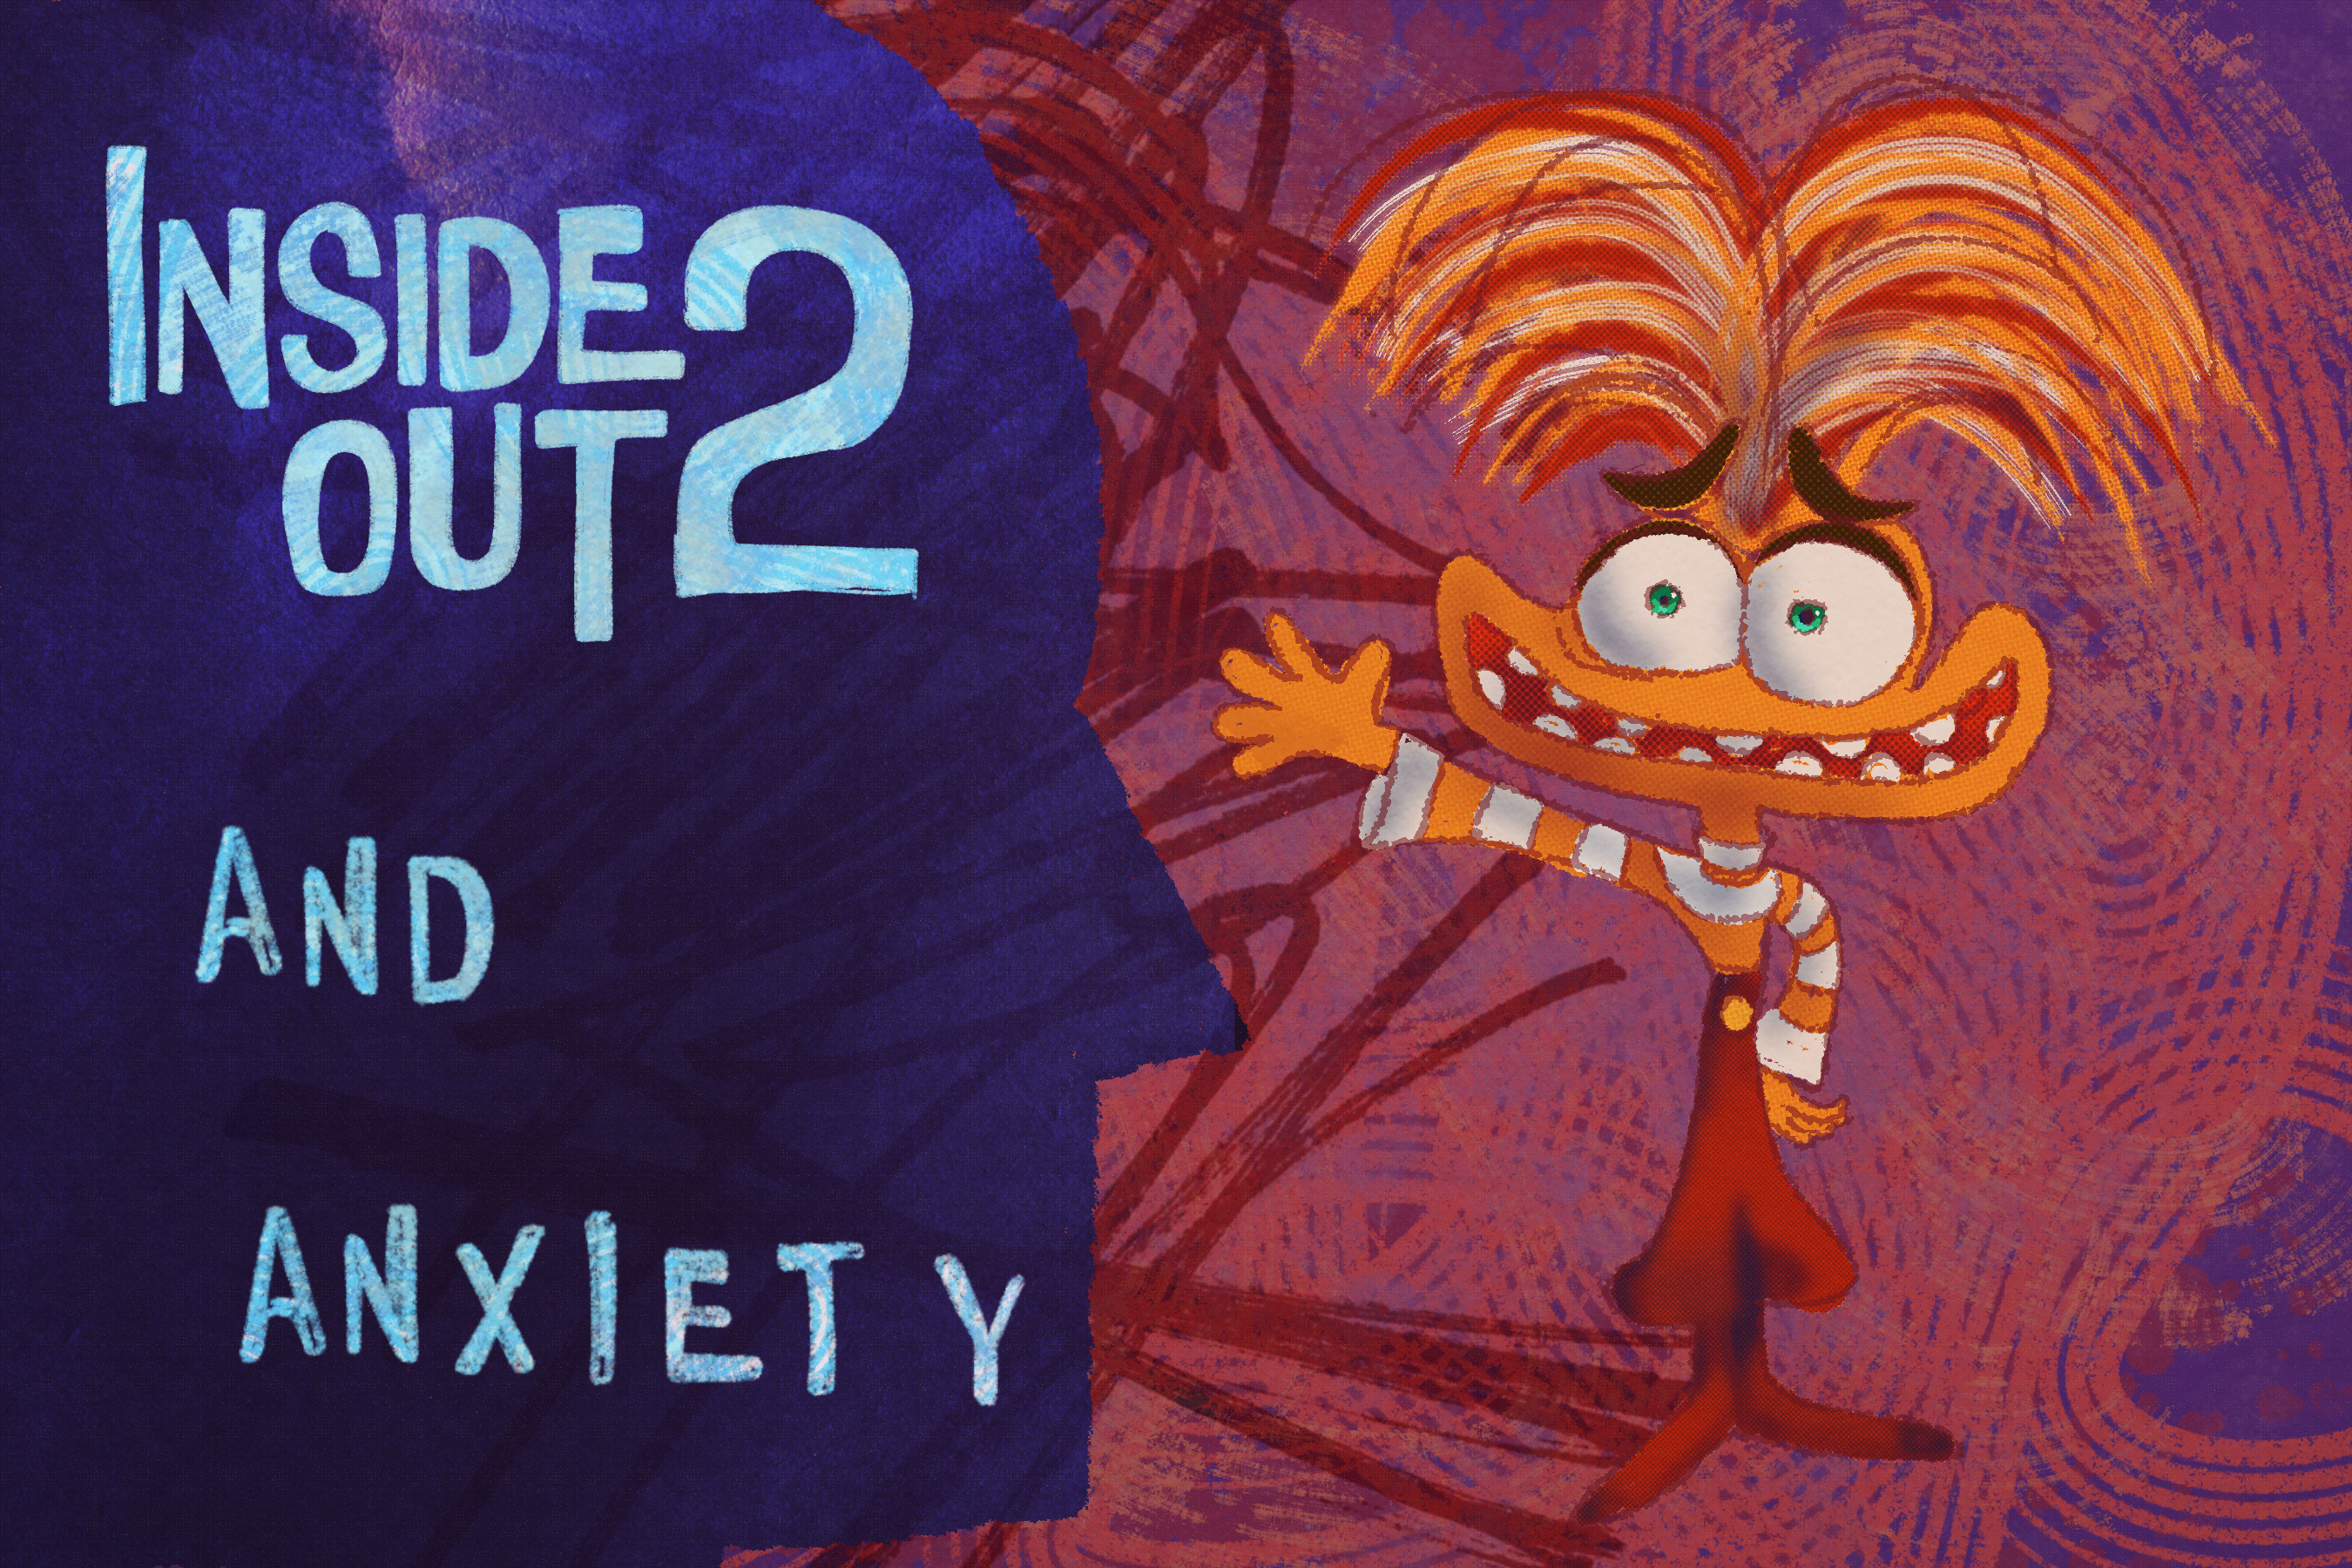 What the Introduction of “Inside Out”'s Anxiety Could Mean - Study Breaks